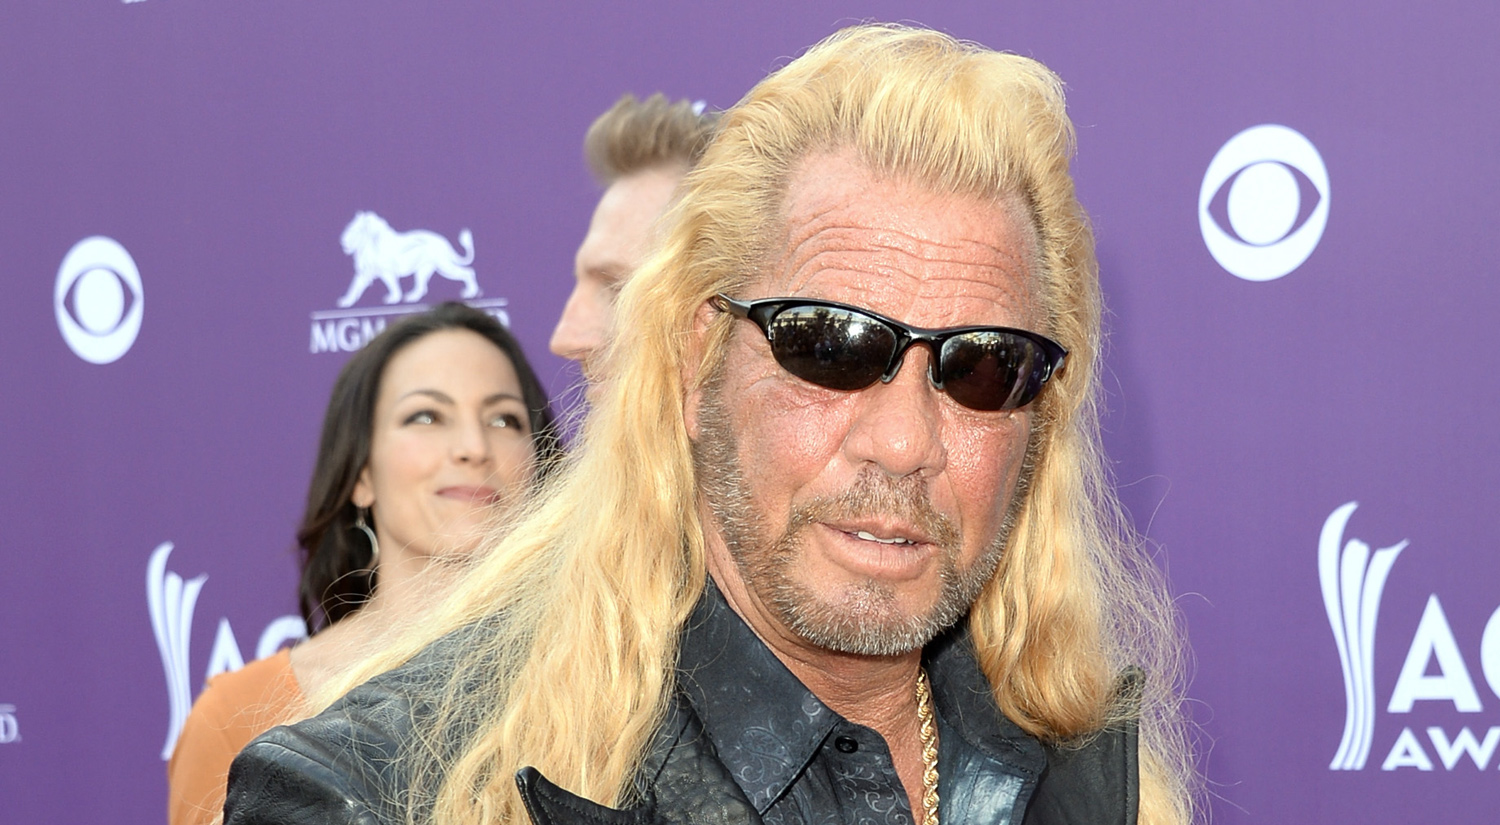 Duane Chapman is Not Dating Family Friend Moon Angell (Report) | Dog the Bounty Hunter ...